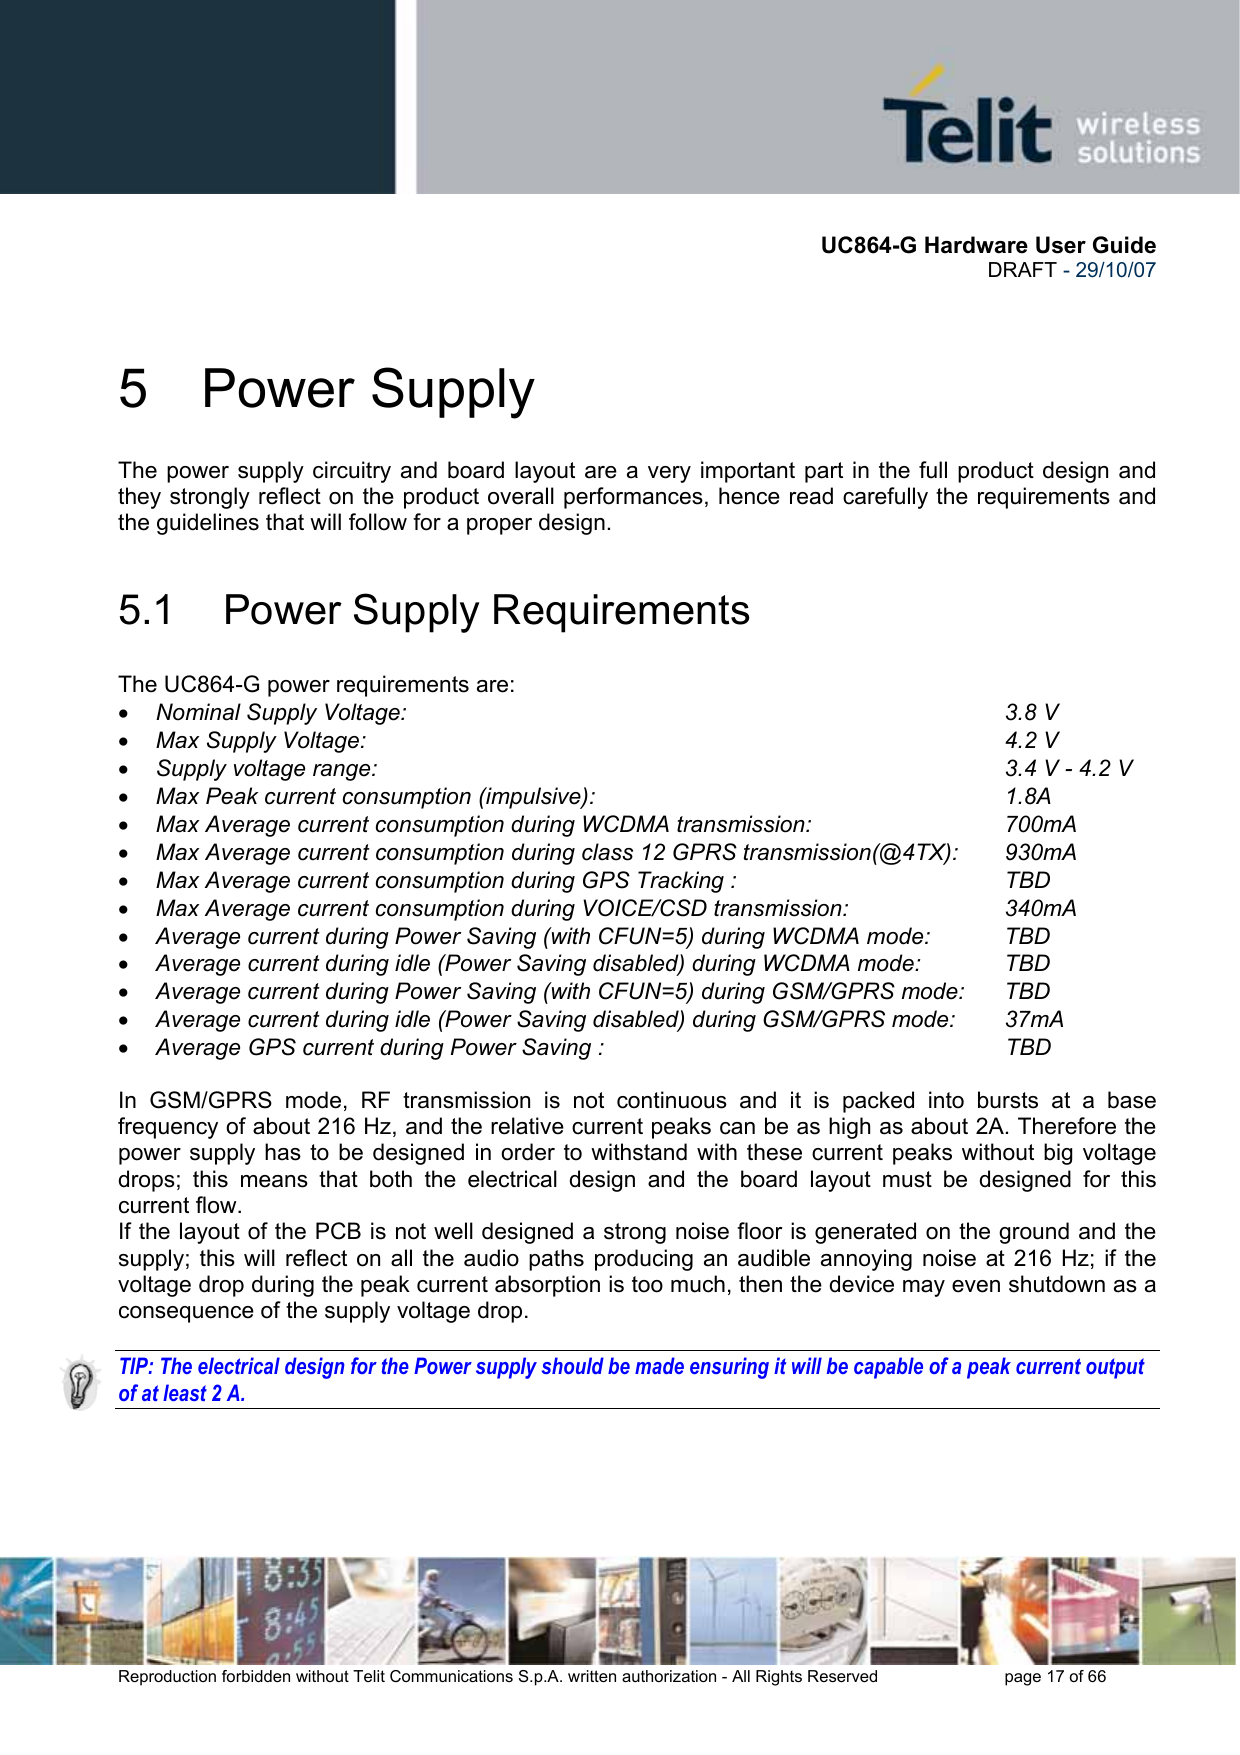       UC864-G Hardware User Guide  DRAFT - 29/10/07      Reproduction forbidden without Telit Communications S.p.A. written authorization - All Rights Reserved    page 17 of 66  5 Power Supply The power supply circuitry and board layout are a very important part in the full product design and they strongly reflect on the product overall performances, hence read carefully the requirements and the guidelines that will follow for a proper design. 5.1  Power Supply Requirements The UC864-G power requirements are: • Nominal Supply Voltage:       3.8 V • Max Supply Voltage:        4.2 V • Supply voltage range:                     3.4 V - 4.2 V • Max Peak current consumption (impulsive):           1.8A • Max Average current consumption during WCDMA transmission:      700mA • Max Average current consumption during class 12 GPRS transmission(@4TX):  930mA • Max Average current consumption during GPS Tracking :                   TBD • Max Average current consumption during VOICE/CSD transmission:    340mA • Average current during Power Saving (with CFUN=5) during WCDMA mode:  TBD • Average current during idle (Power Saving disabled) during WCDMA mode:          TBD • Average current during Power Saving (with CFUN=5) during GSM/GPRS mode:  TBD • Average current during idle (Power Saving disabled) during GSM/GPRS mode:        37mA • Average GPS current during Power Saving :                                                               TBD  In GSM/GPRS mode, RF transmission is not continuous and it is packed into bursts at a base frequency of about 216 Hz, and the relative current peaks can be as high as about 2A. Therefore the power supply has to be designed in order to withstand with these current peaks without big voltage drops; this means that both the electrical design and the board layout must be designed for this current flow. If the layout of the PCB is not well designed a strong noise floor is generated on the ground and the supply; this will reflect on all the audio paths producing an audible annoying noise at 216 Hz; if the voltage drop during the peak current absorption is too much, then the device may even shutdown as a consequence of the supply voltage drop.  TIP: The electrical design for the Power supply should be made ensuring it will be capable of a peak current output of at least 2 A. 